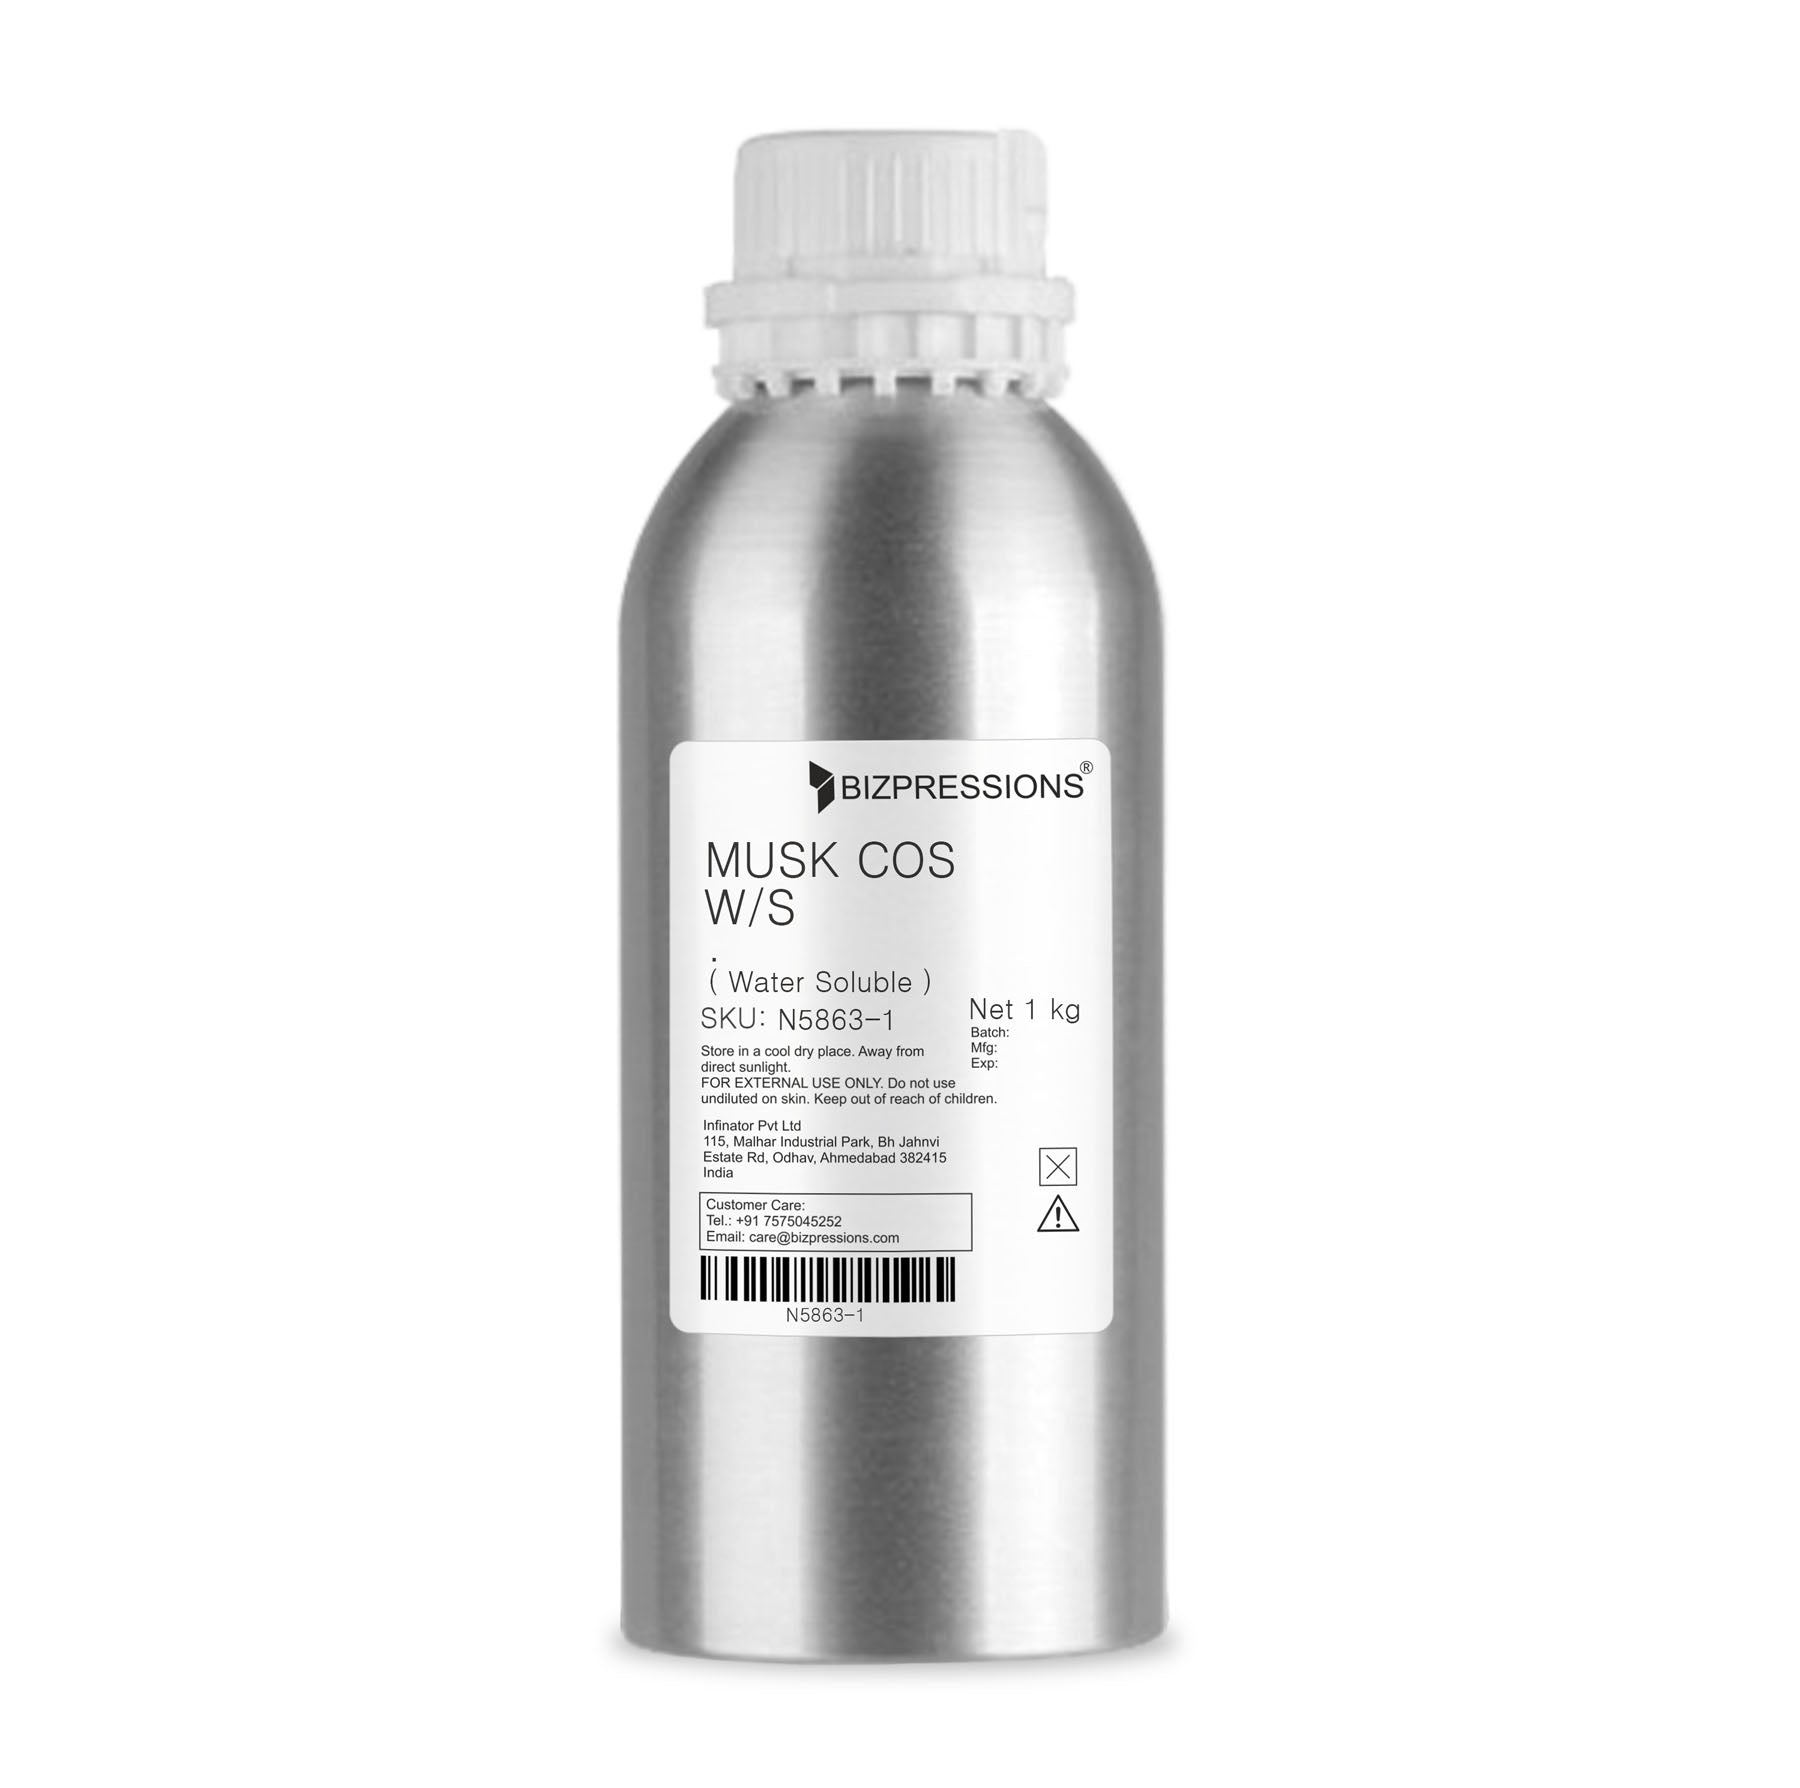 MUSK COS W/S - Fragrance ( Water Soluble ) - 1 kg